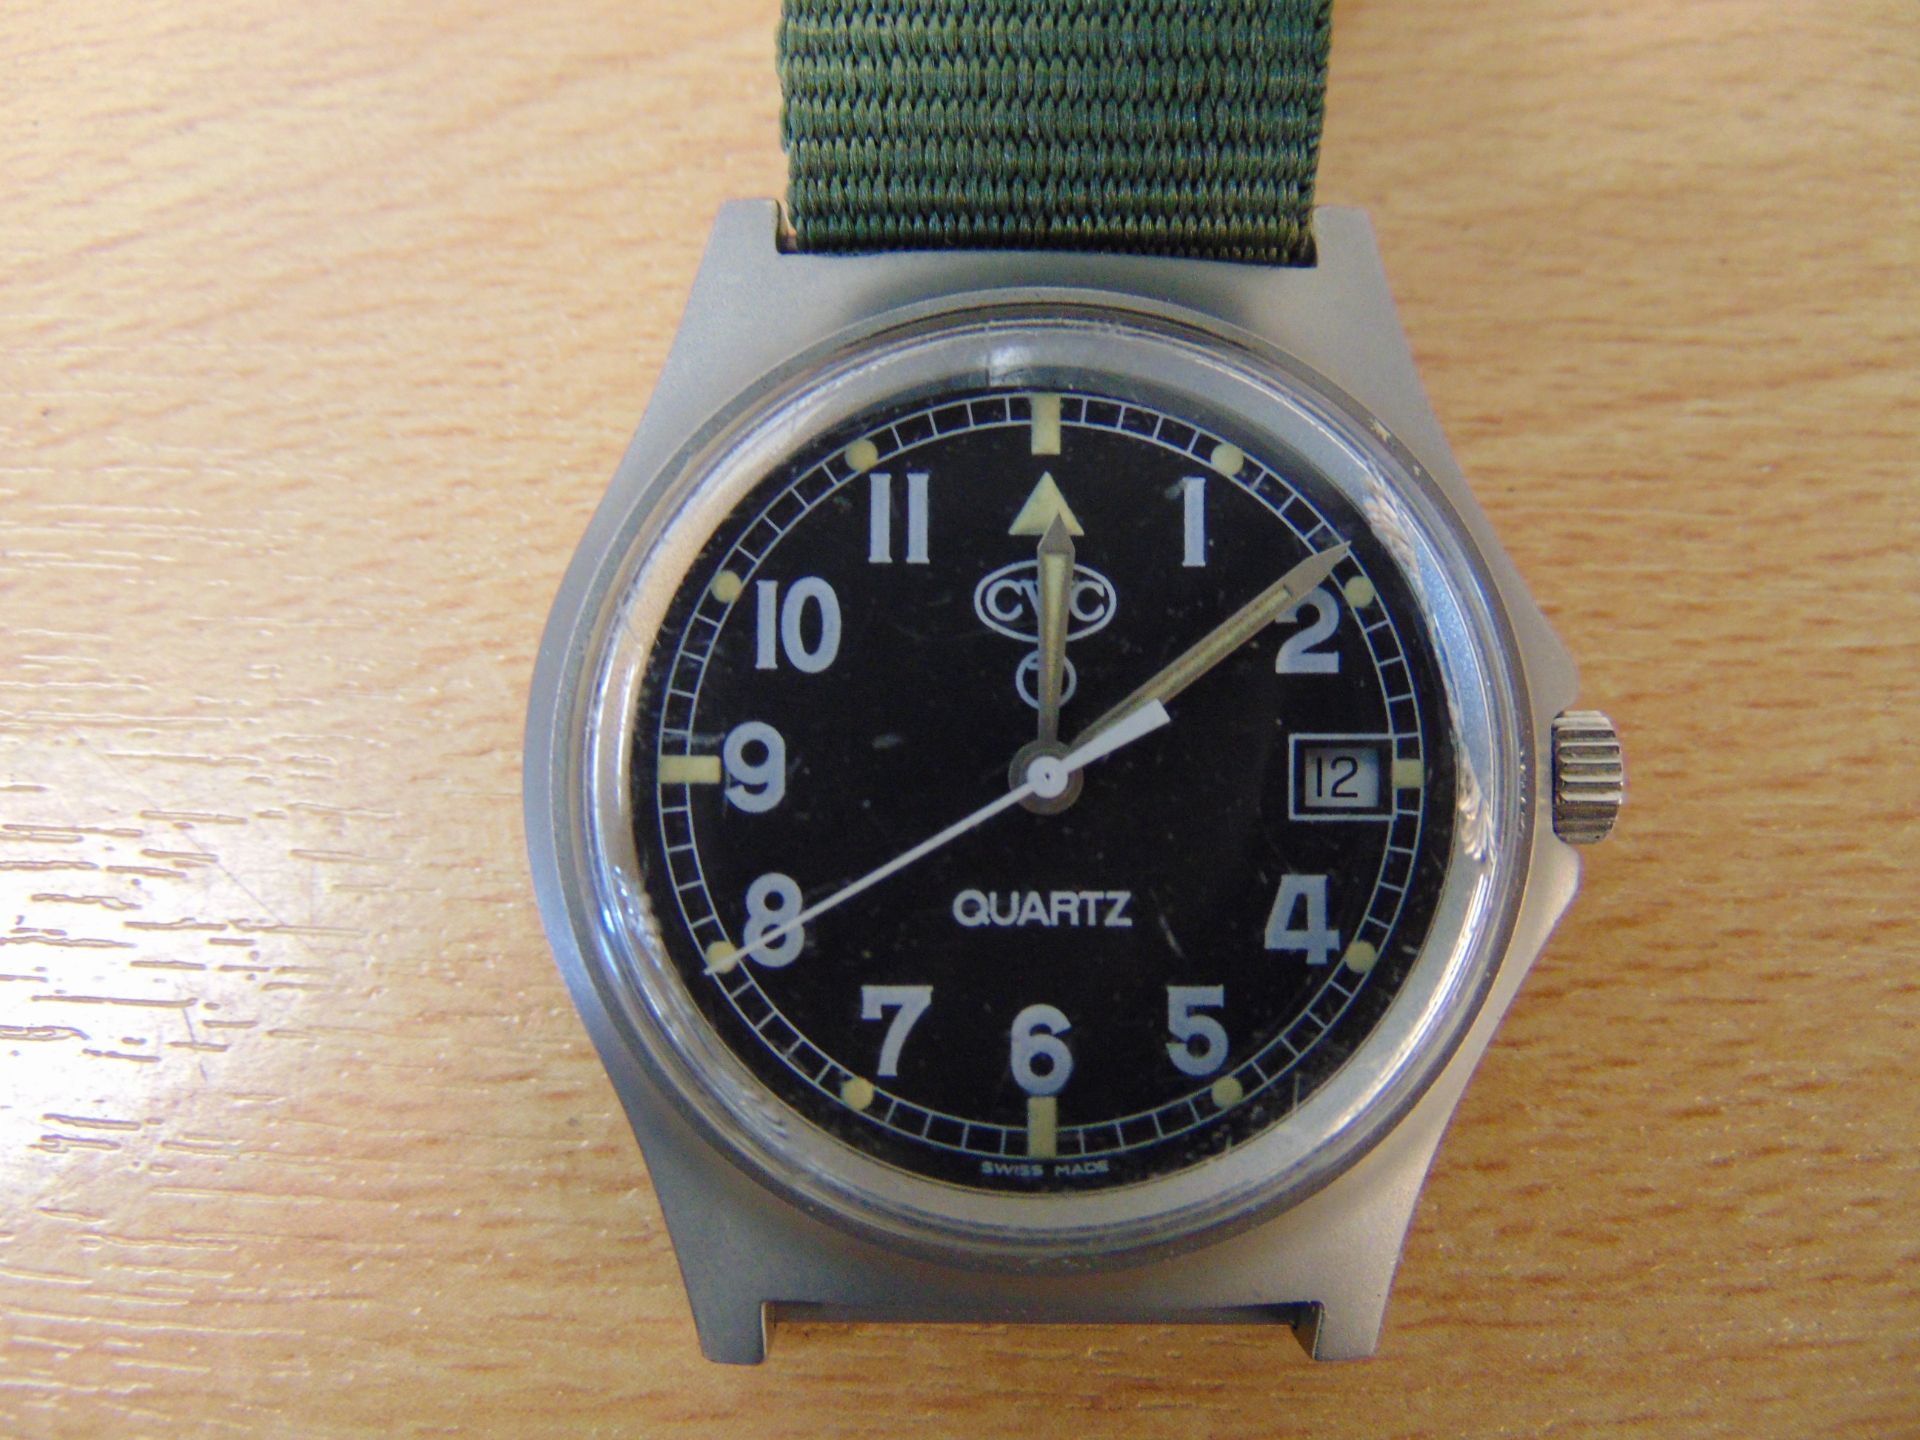 Very Rare CWC British Service Watch Serial No 0033 with Date Adjust Nato Marks Date 1996